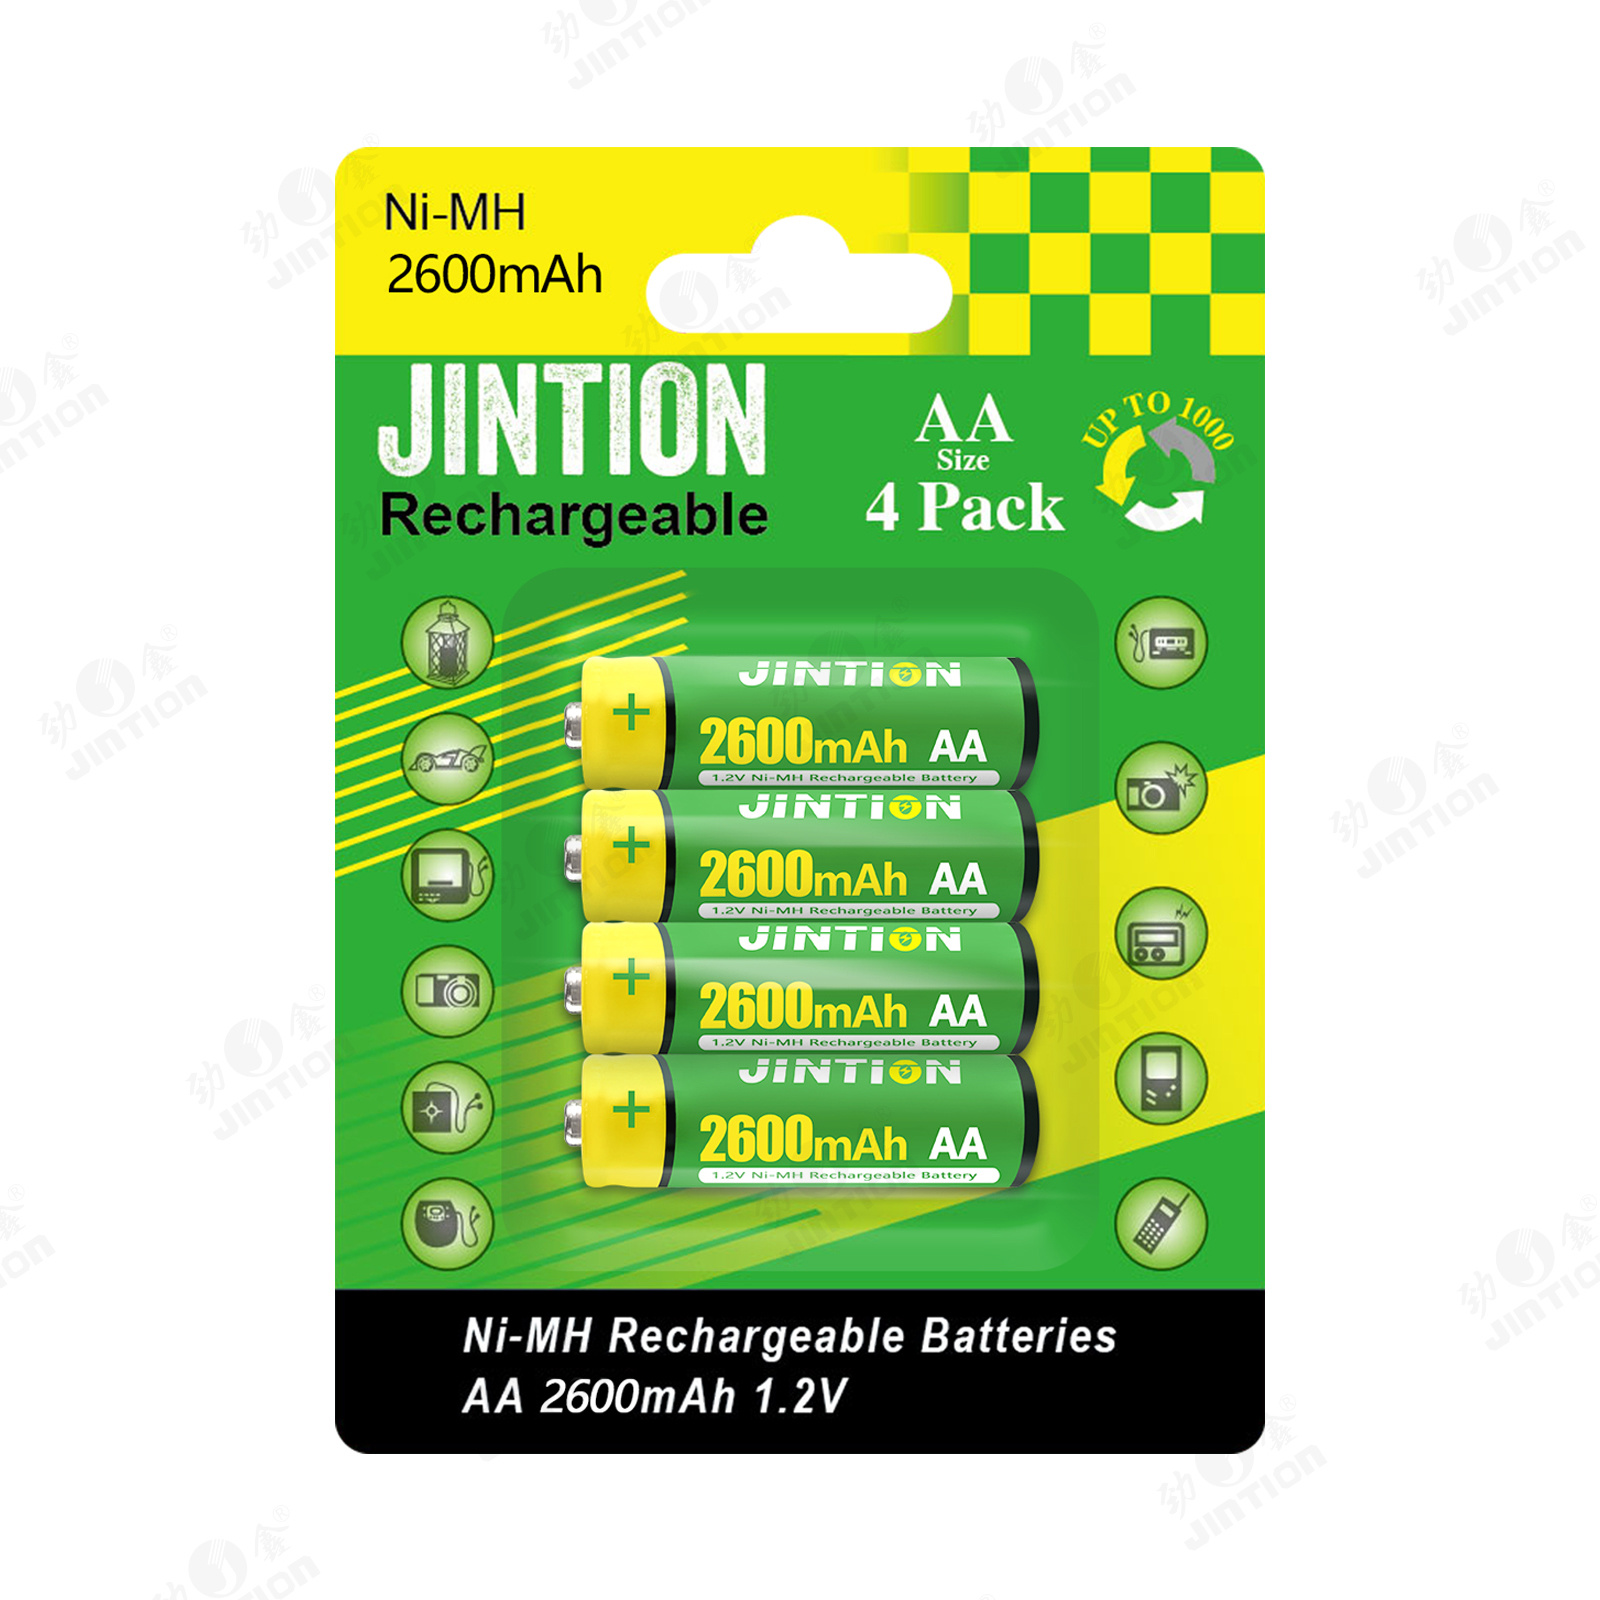 JINTION NiMh AA 2600mAh 1.2v Pack of 4 aa rechargeable battery Blister Card Packaging Customize for Shopping malls supermarkets